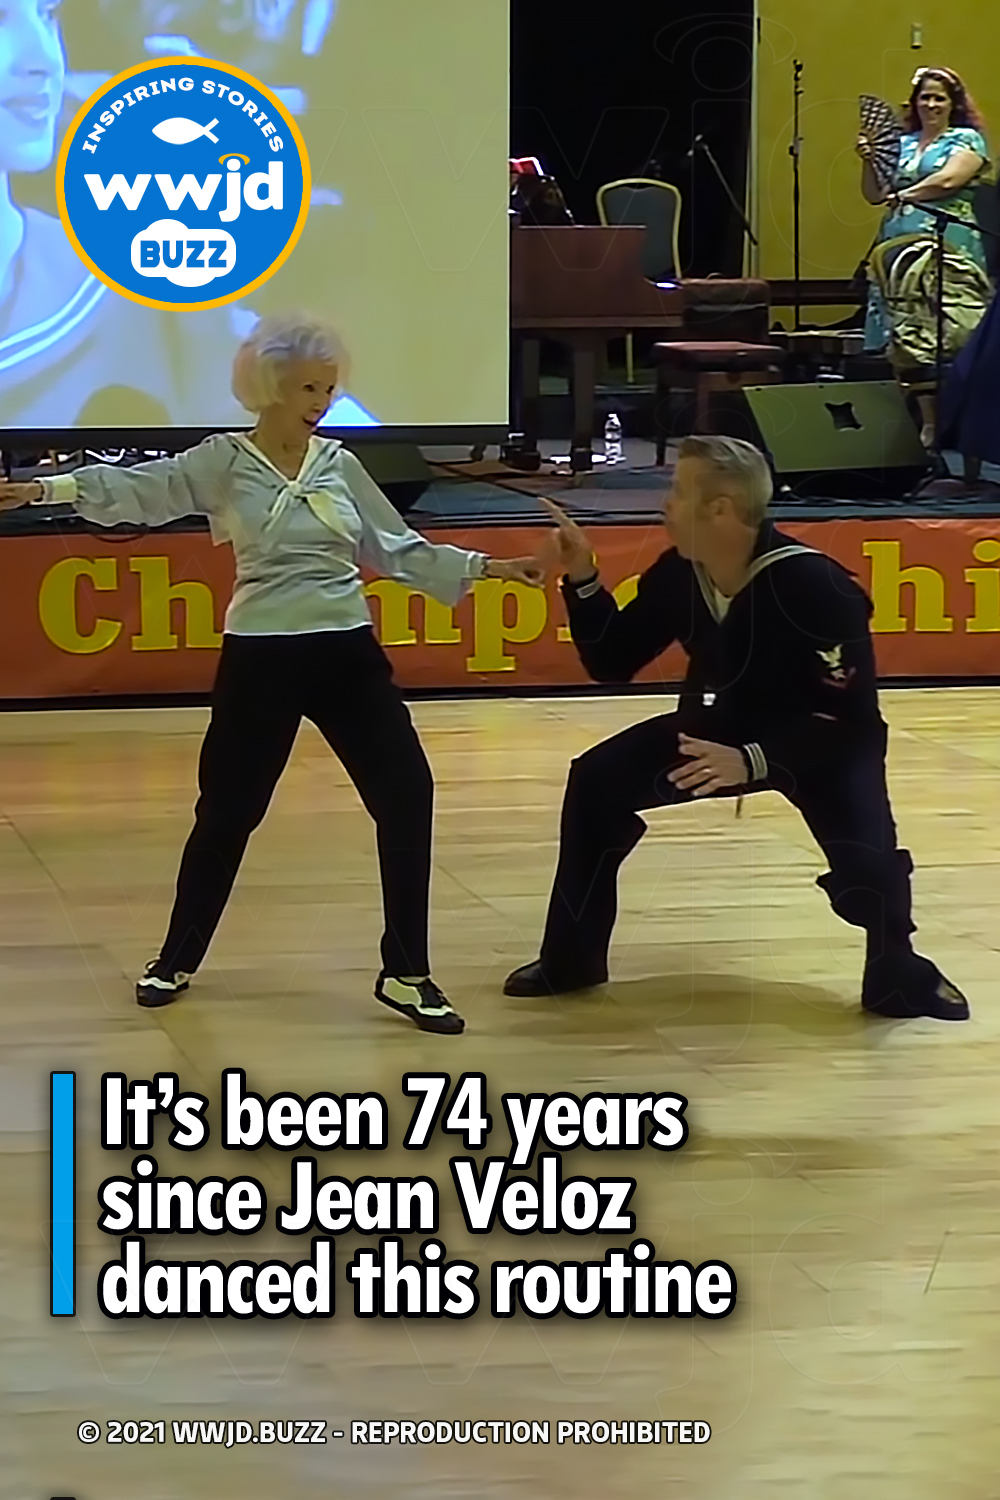 It’s been 74 years since Jean Veloz danced this routine